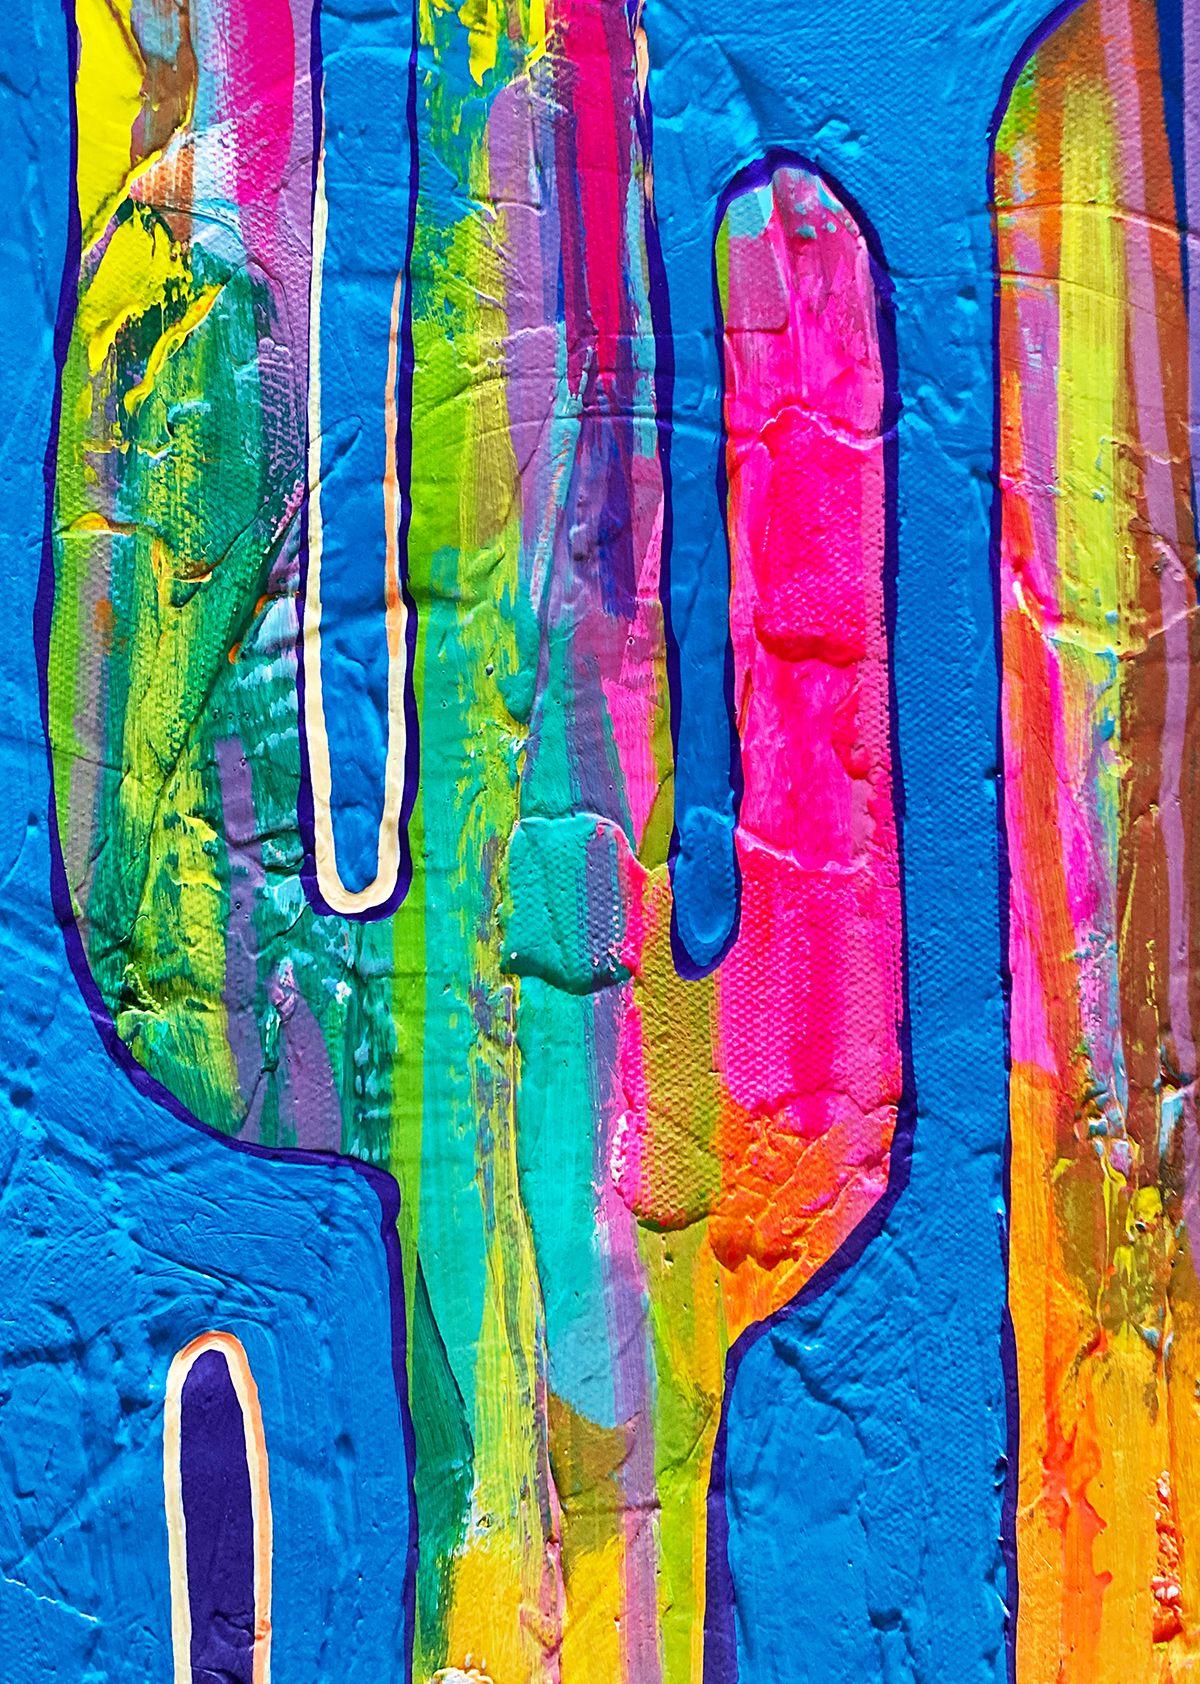 Colorful cactuses. Vibrant colors. Rich texture. Bold brushstrokes. Original acrylic painting on stretched canvas. Gallery profile. Size 40 x 30 x 1.5